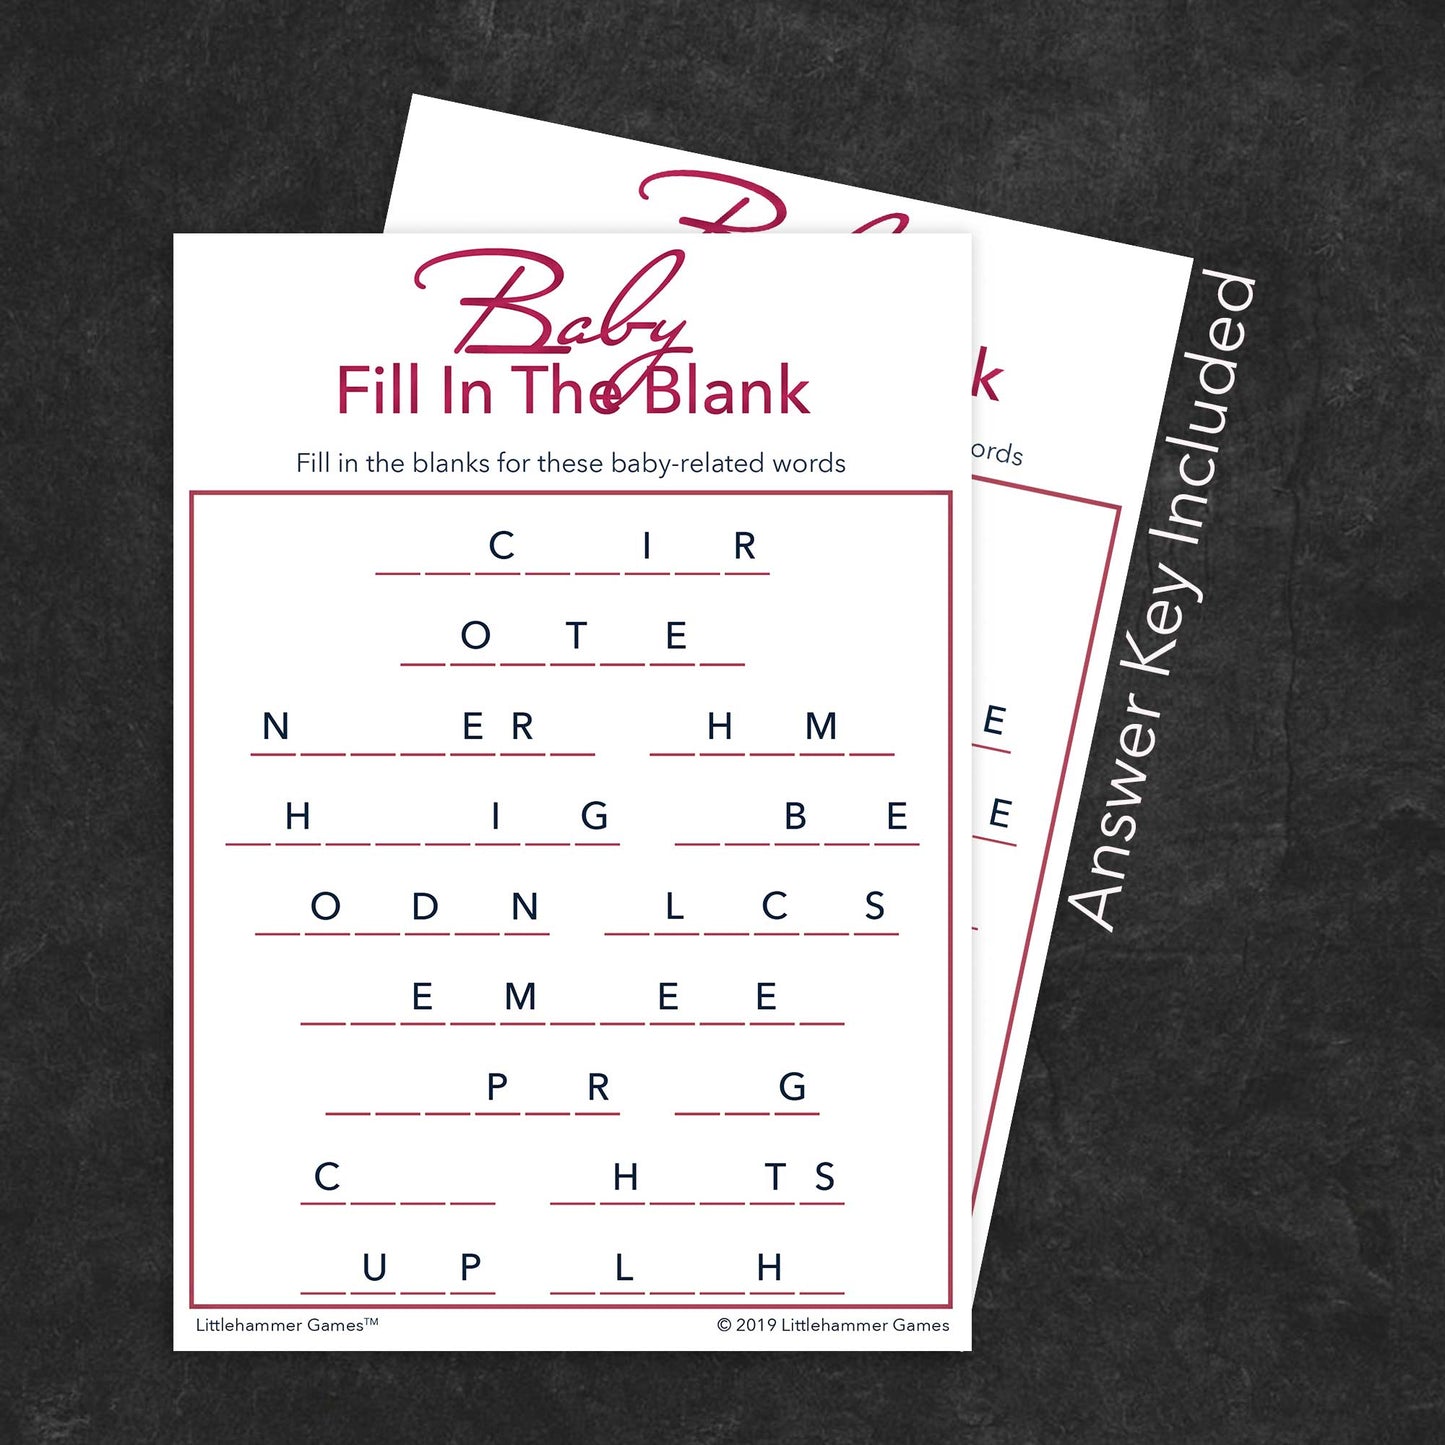 Baby Fill in the Blank game card with a rose gold and white background with answer card tucked behind it on a slate background with white text that says "Answer Key Included"